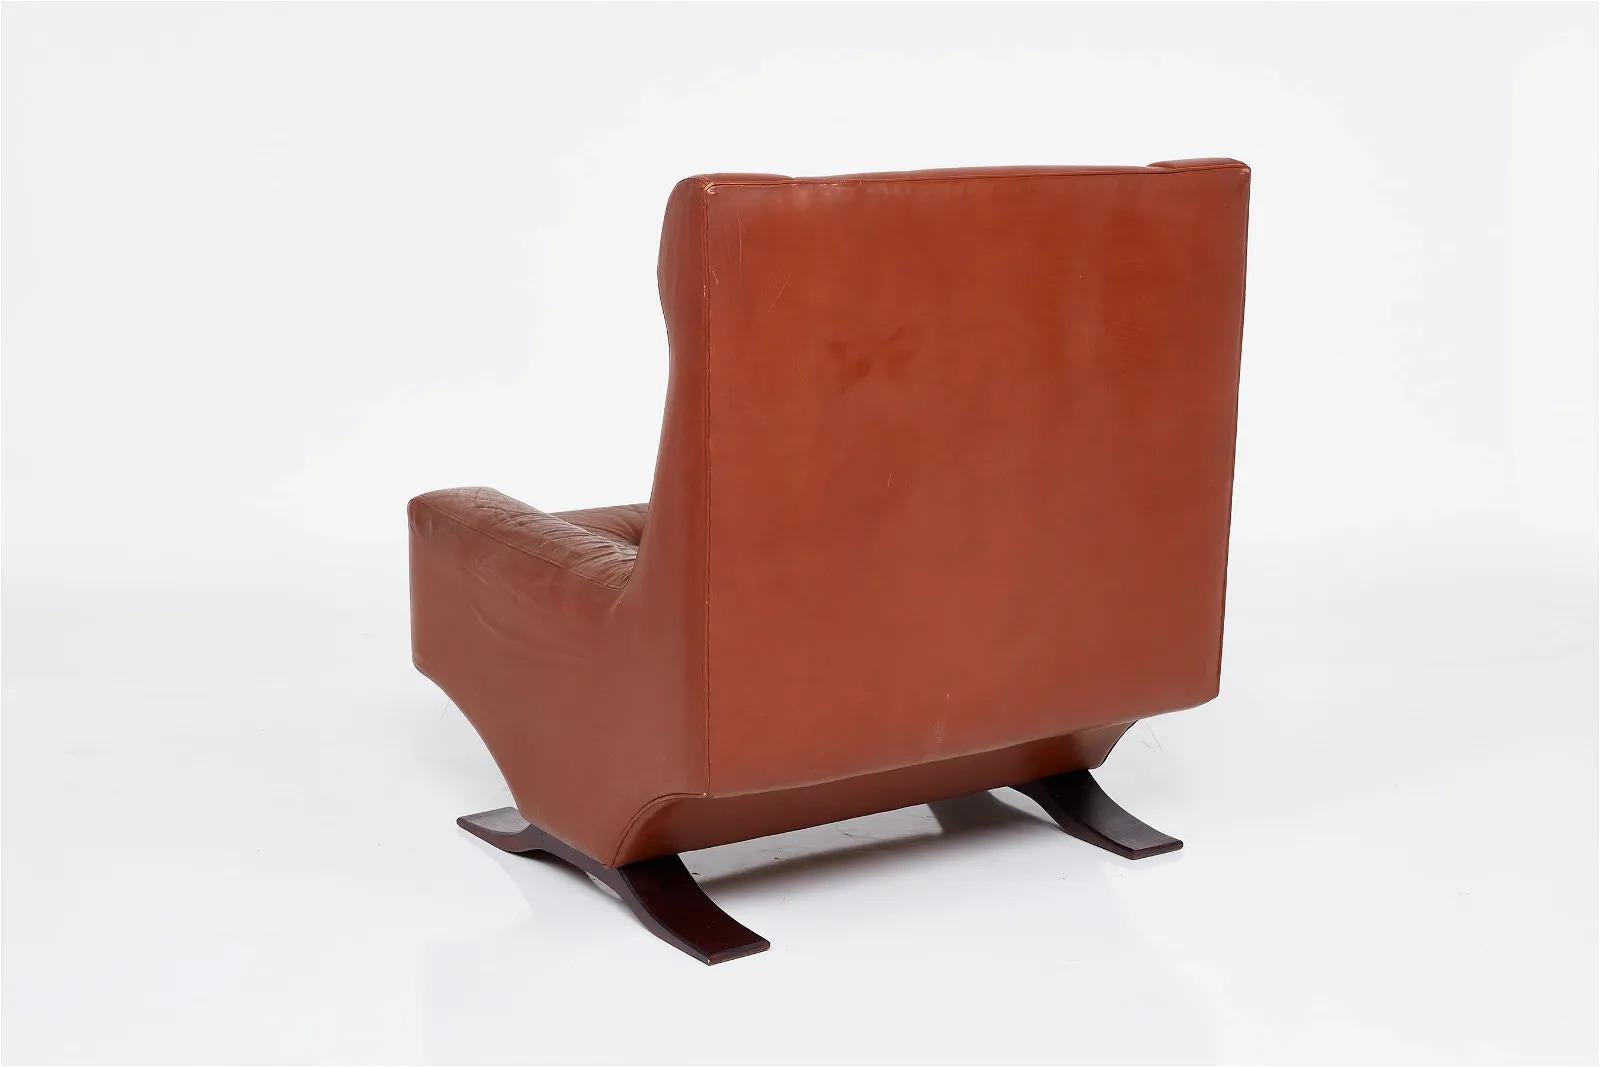 Mid-20th Century Italian Magister Lounge Chair and Ottoman by Franz Sartori for Flexform, c1960s For Sale